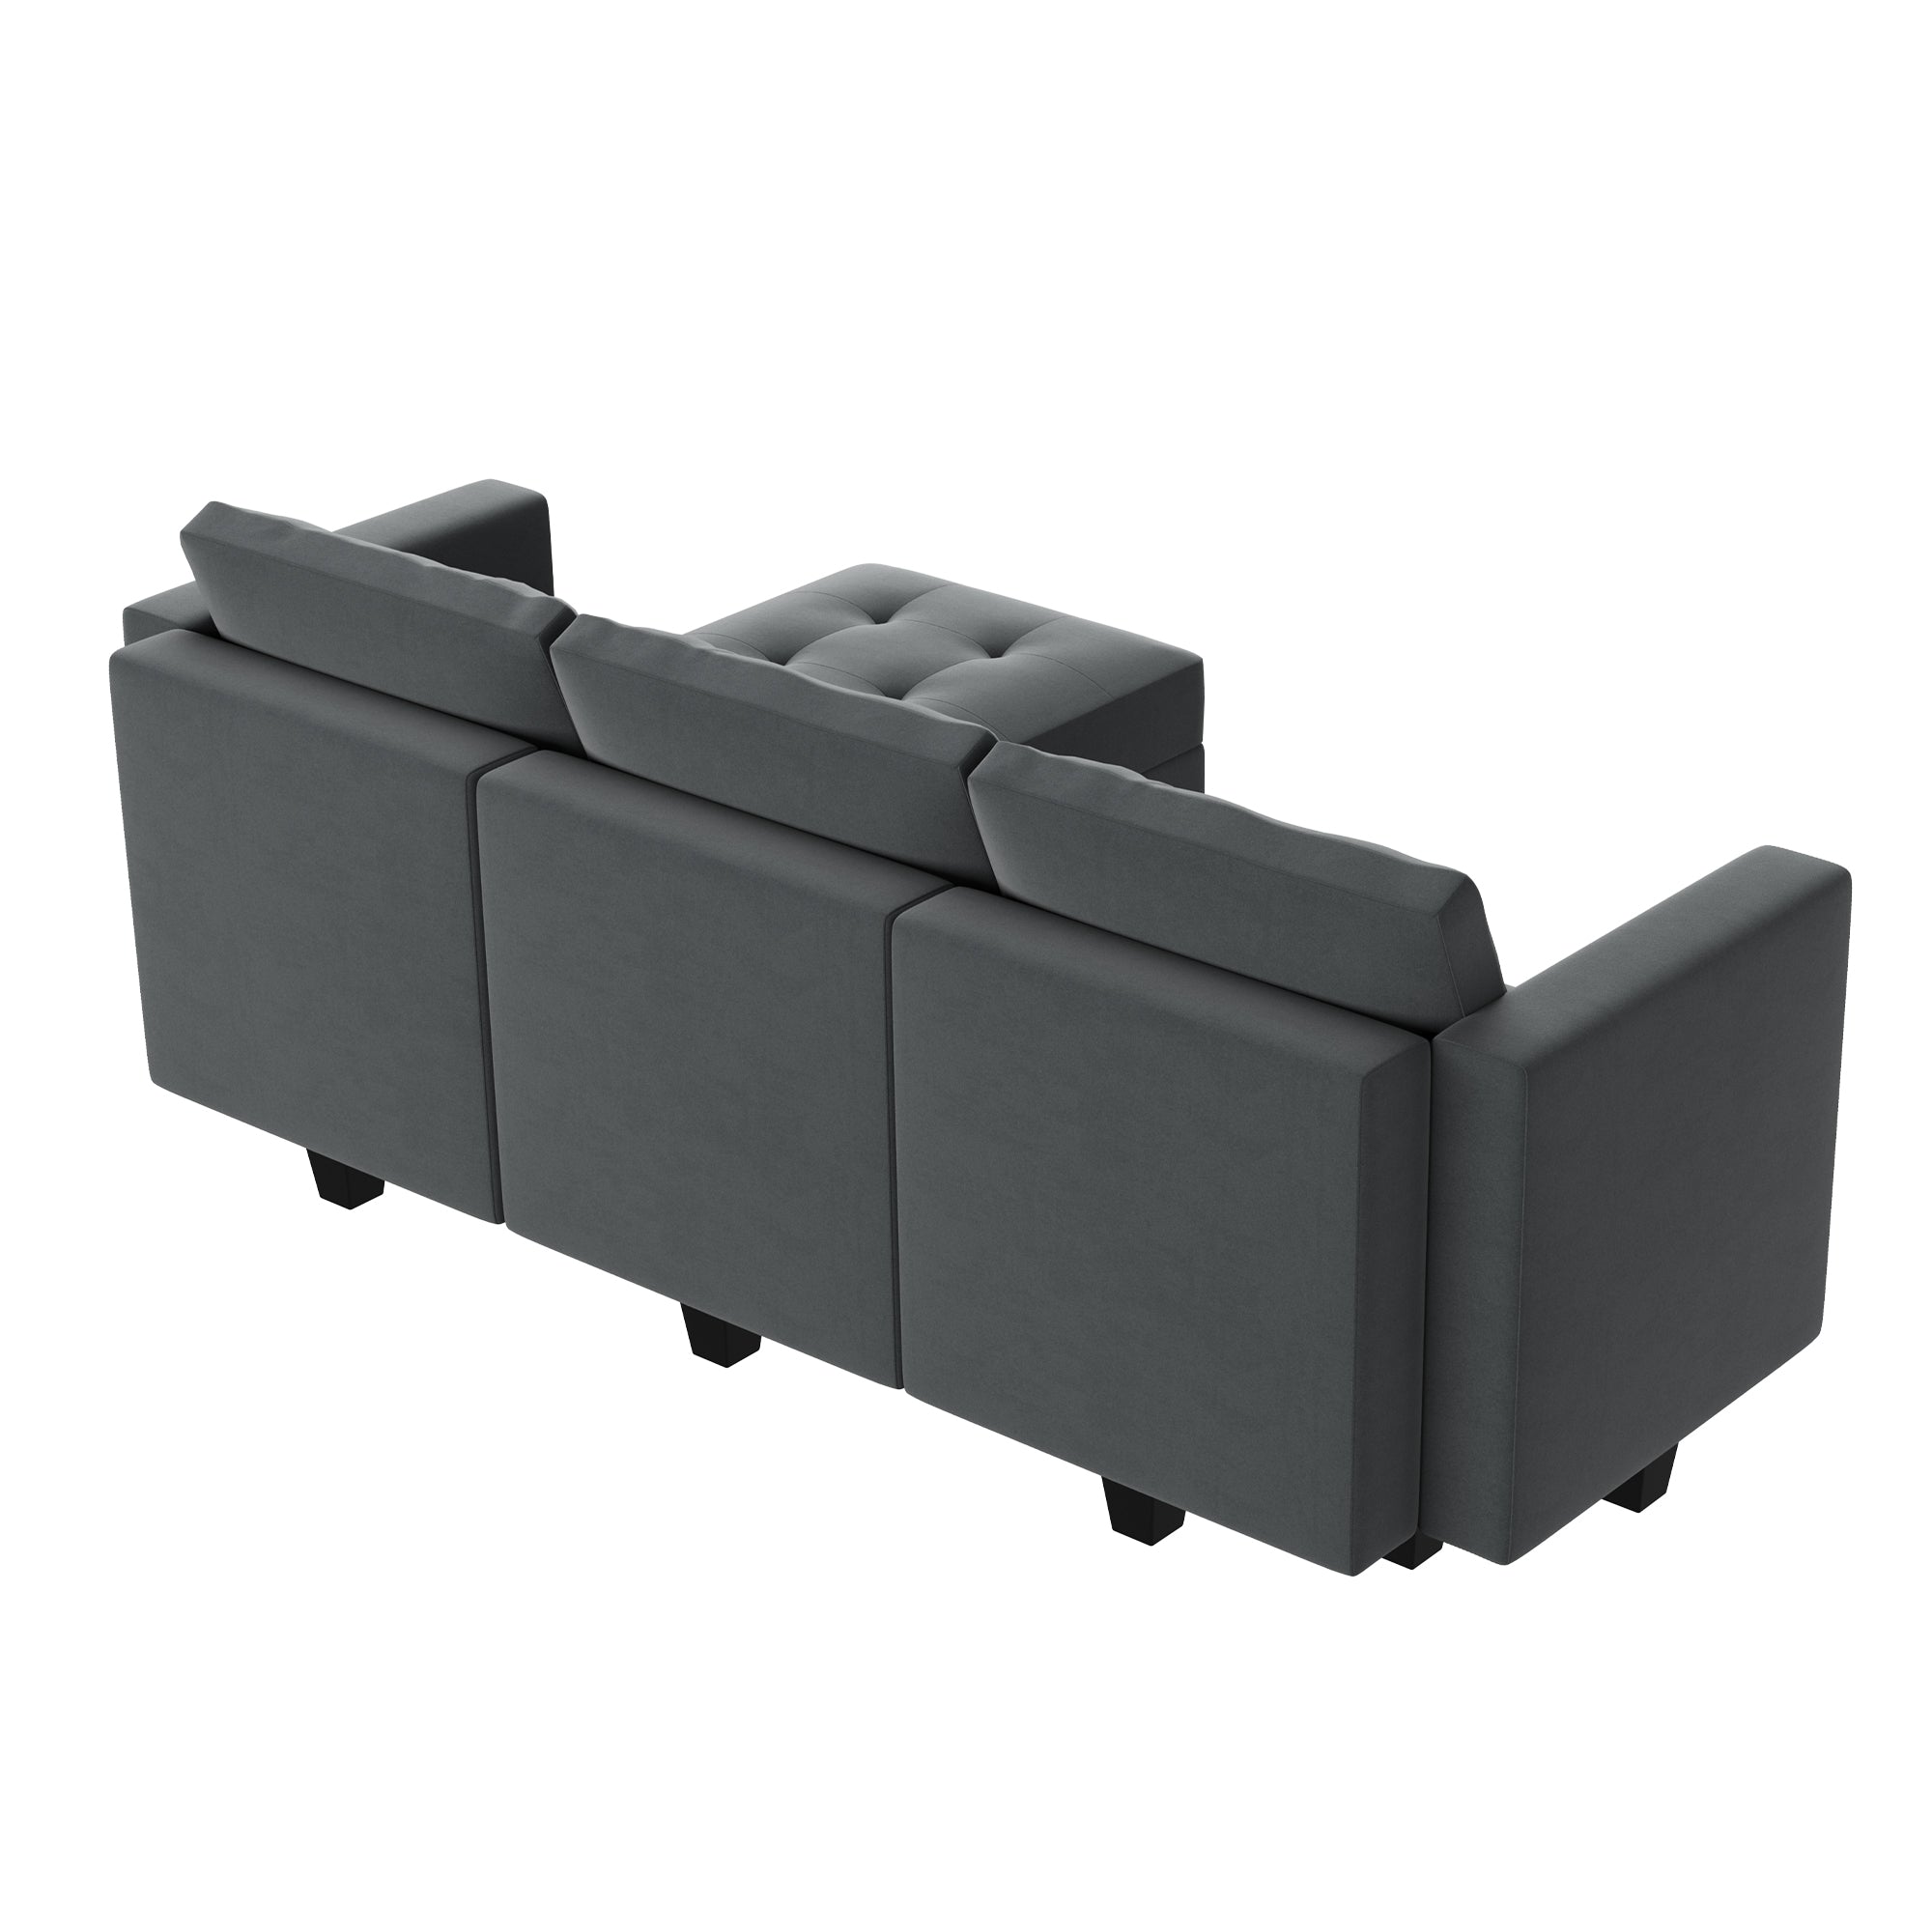 HONBAY 4-Piece Velvet Modular Sectional With Storage Seat